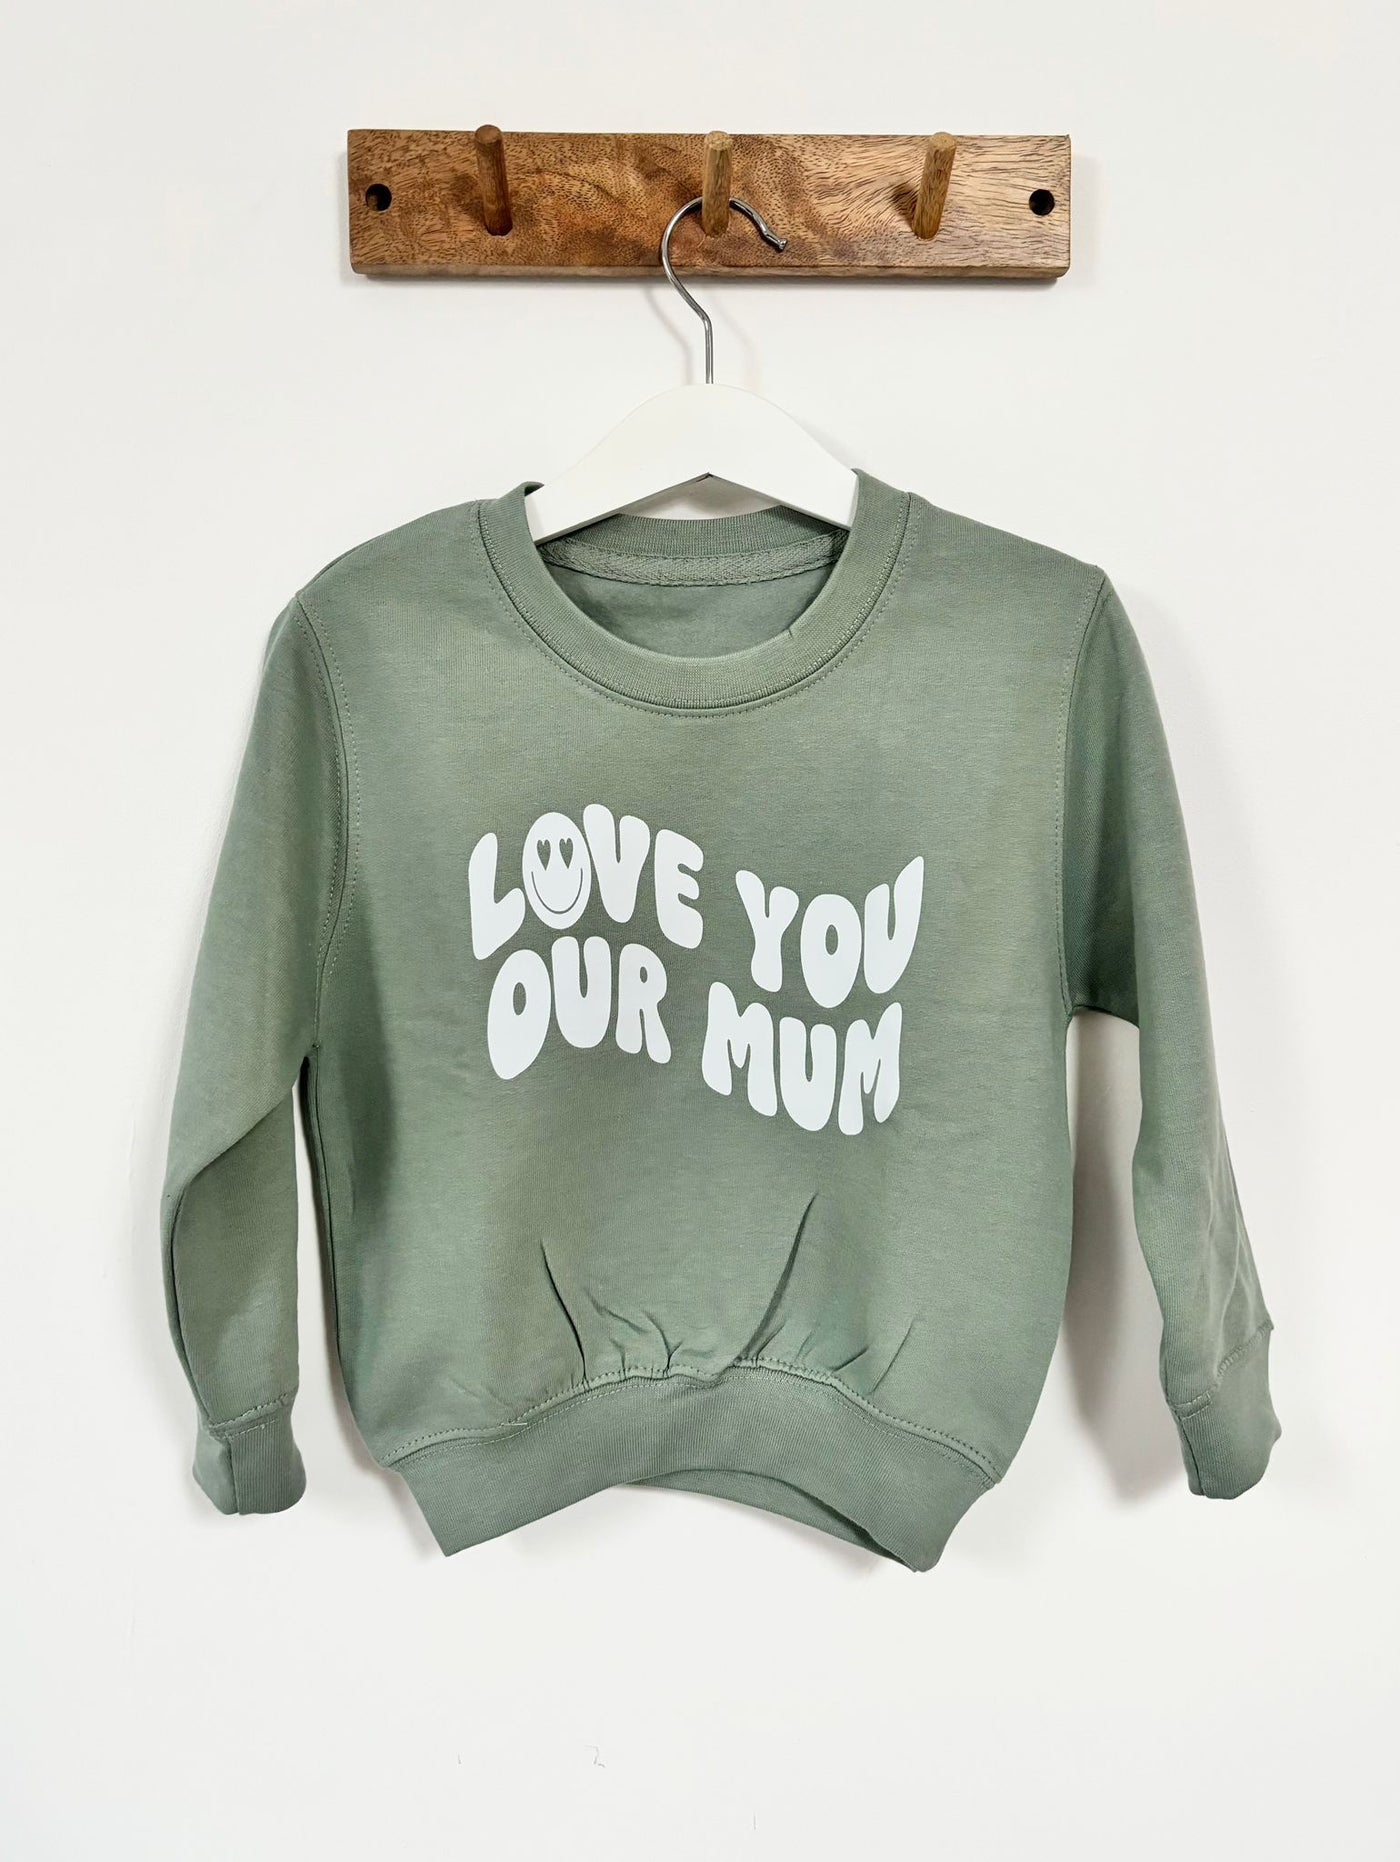 Our Albie ‘Love You Our Mum’ sweatshirt for kids in cool green